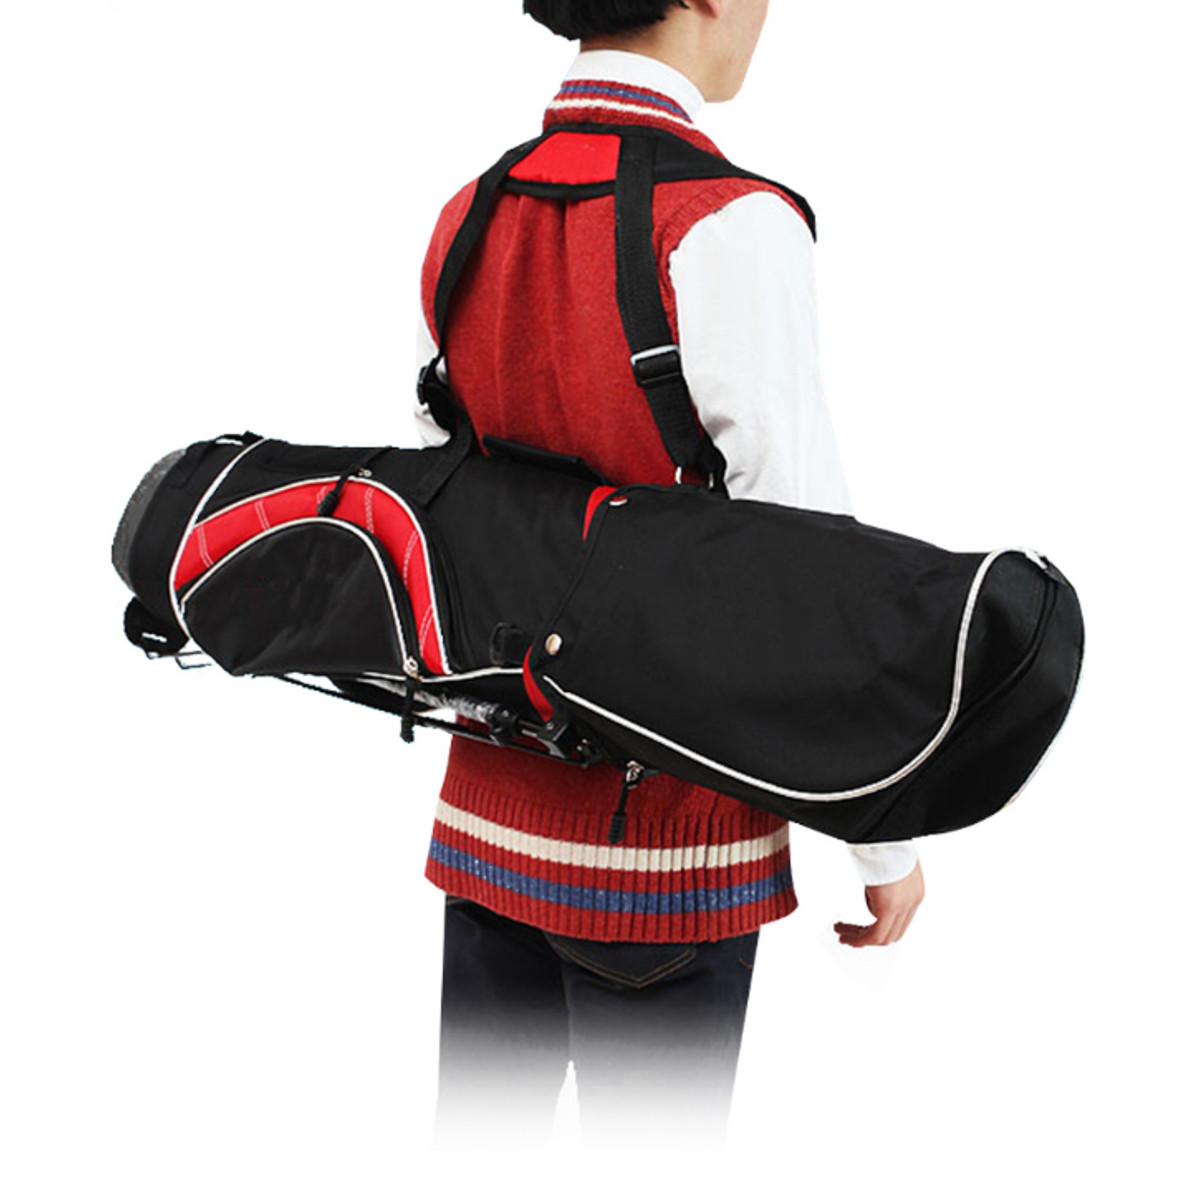 Childrens-Golf-Bag-Golf-Support-Ultra-Light-Stand-Portable-Large-Capacity-Double-Shoulder-Strap-For--1810143-4